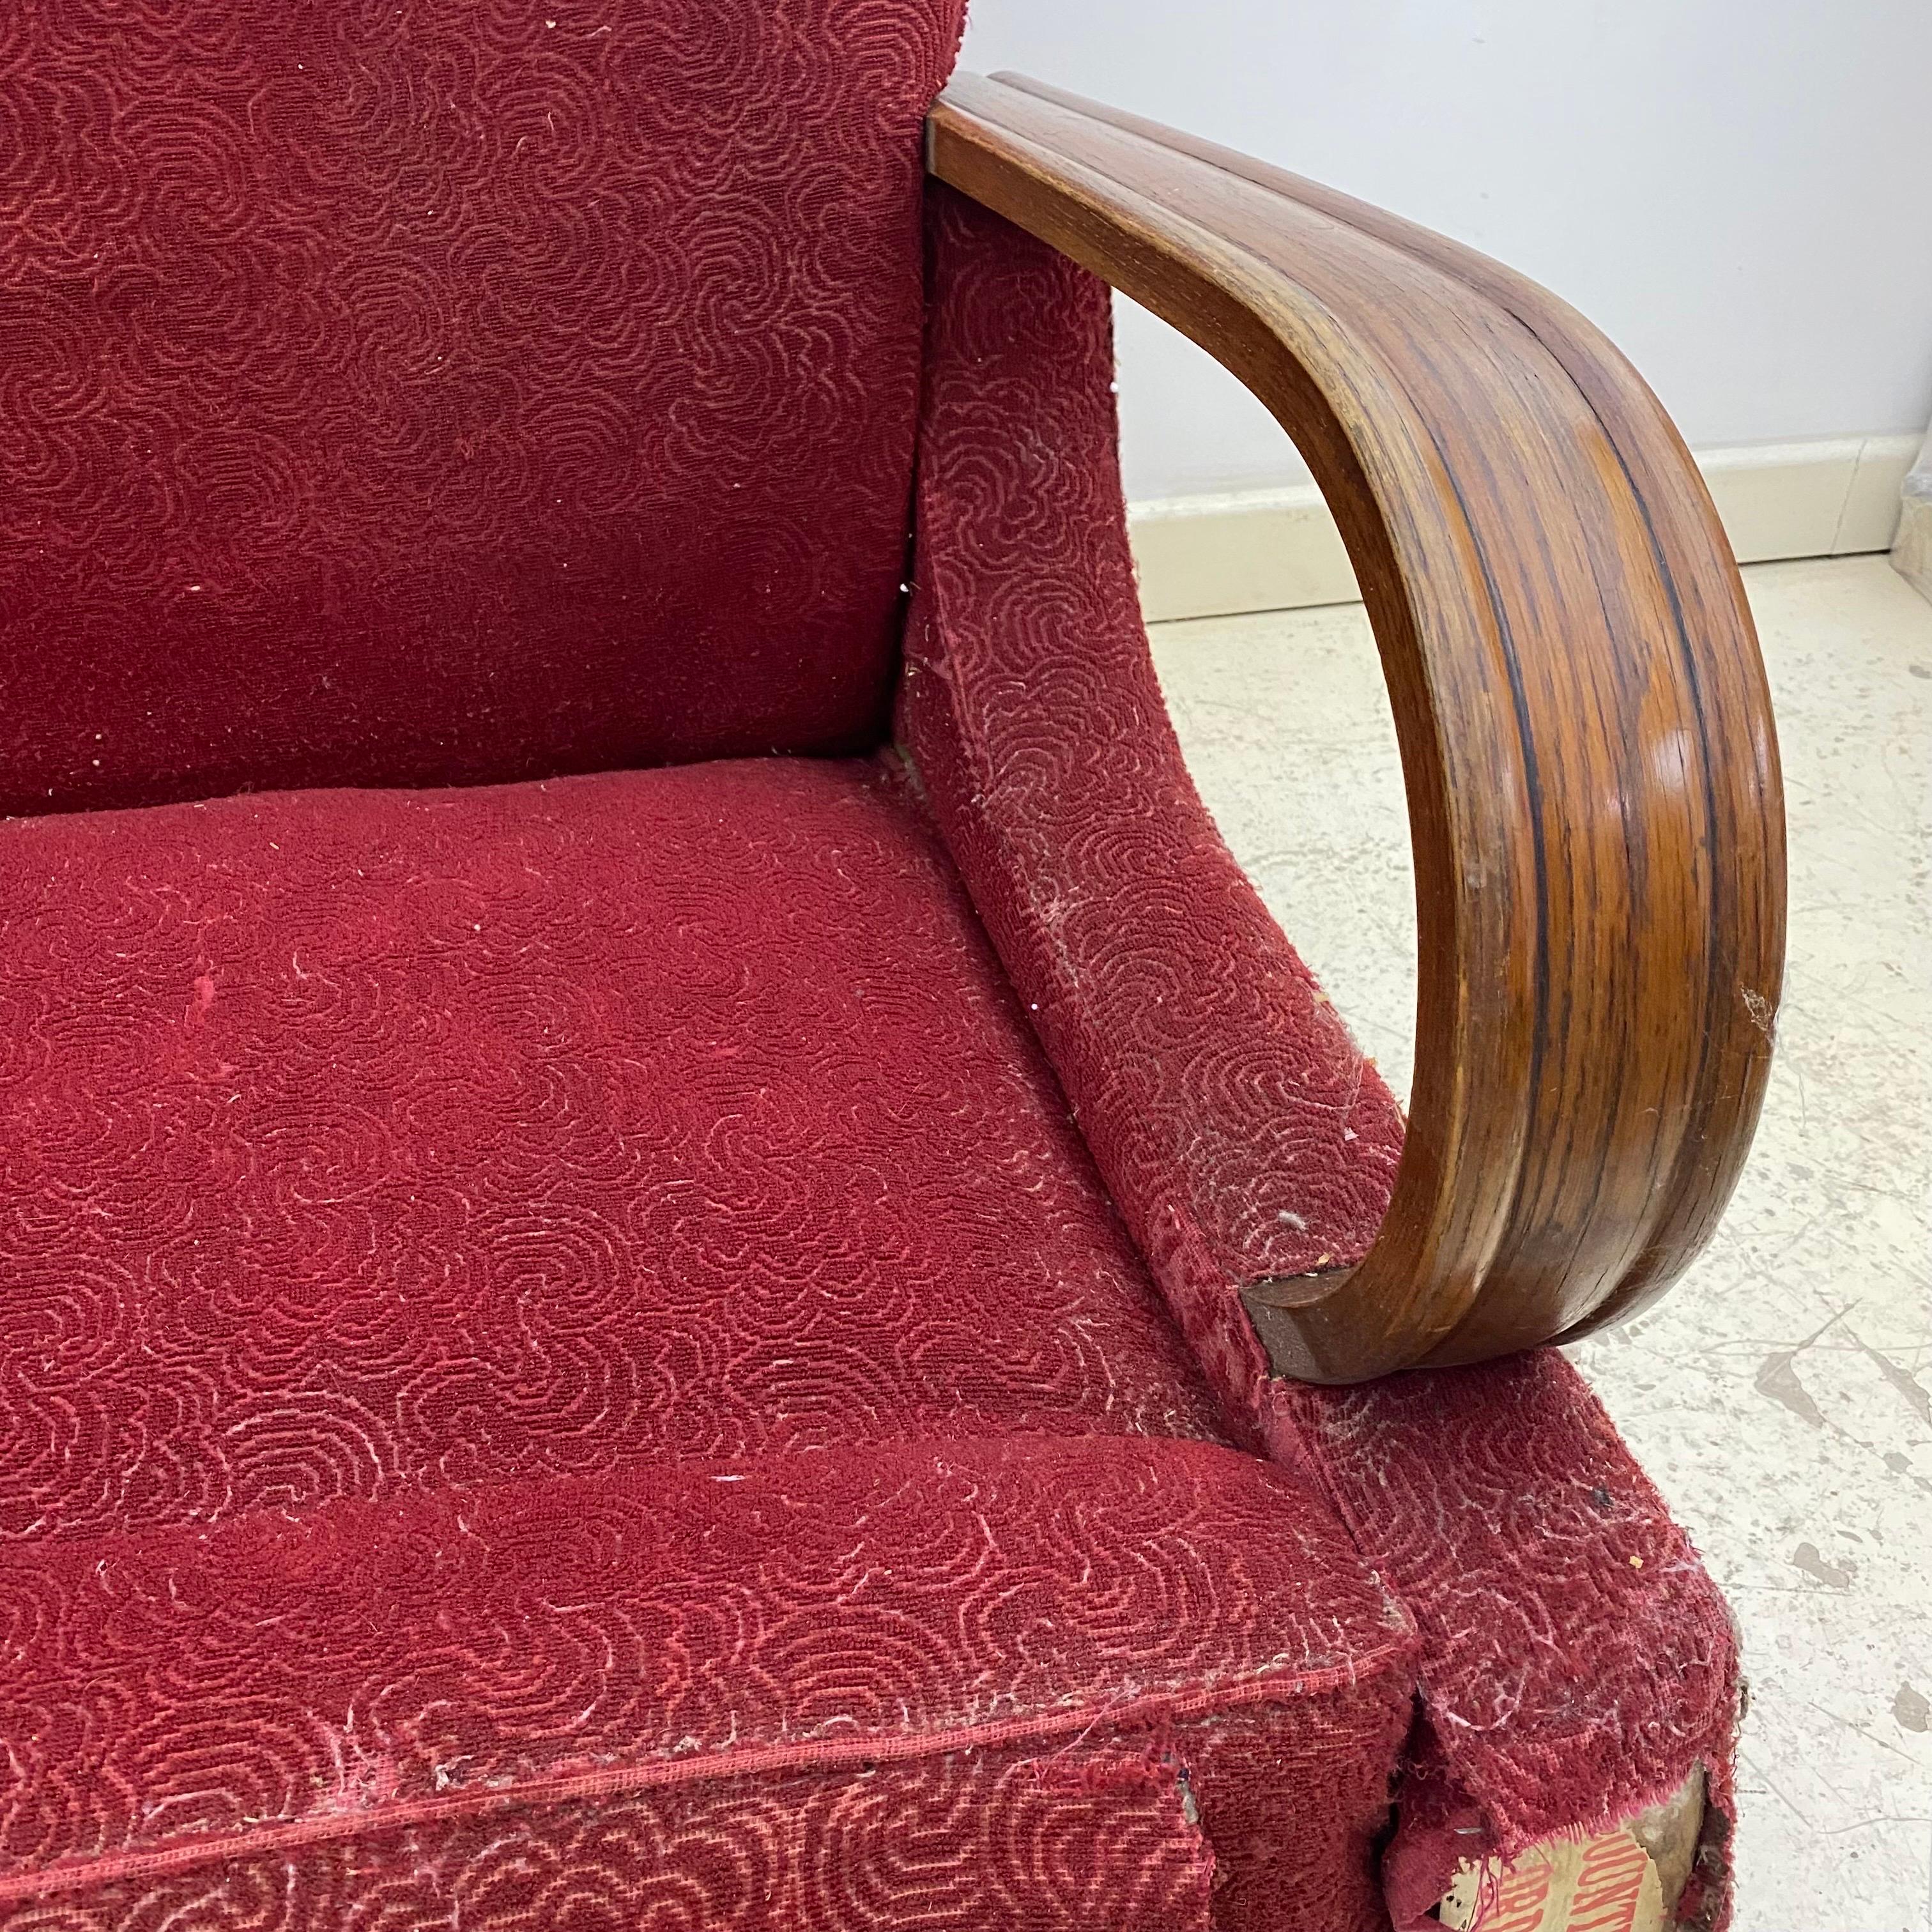 Art Deco 1940s Red Two Seater Distressed Sofa Restoration Project As Seen Poirot en vente 1